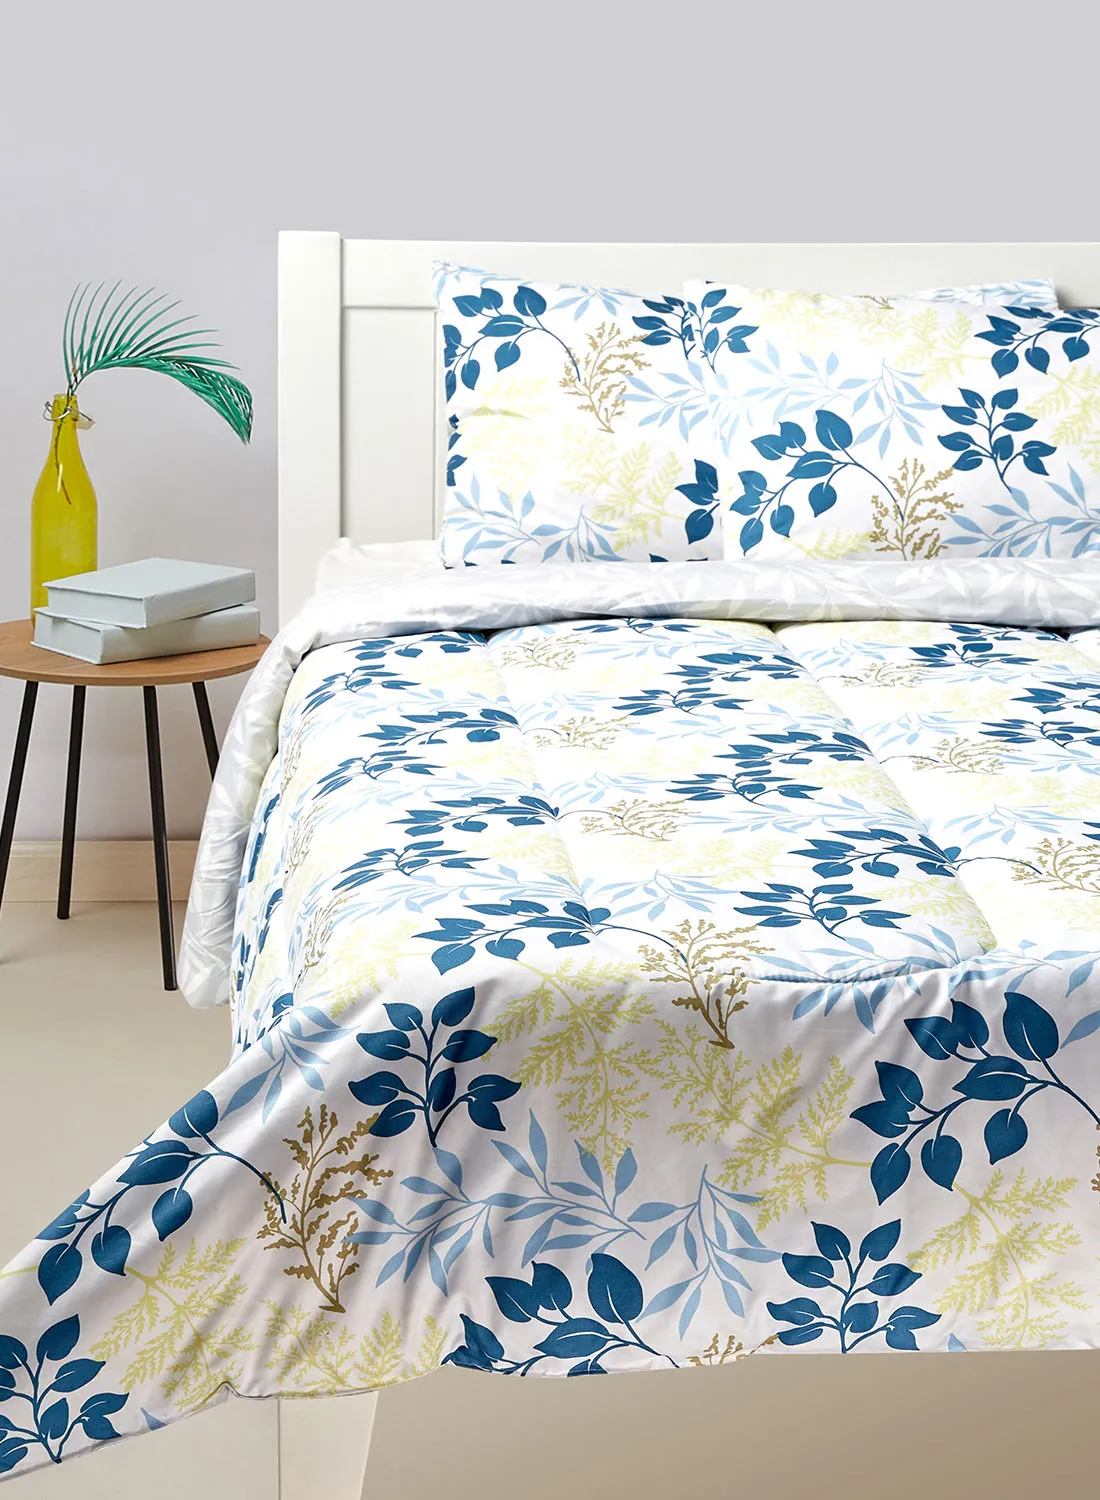 Amal Comforter Set Queen Size All Season Everyday Use Bedding Set Extra Soft Microfiber 3 Pieces 1 Comforter 2 Pillow Covers  White/Blue/Yellow